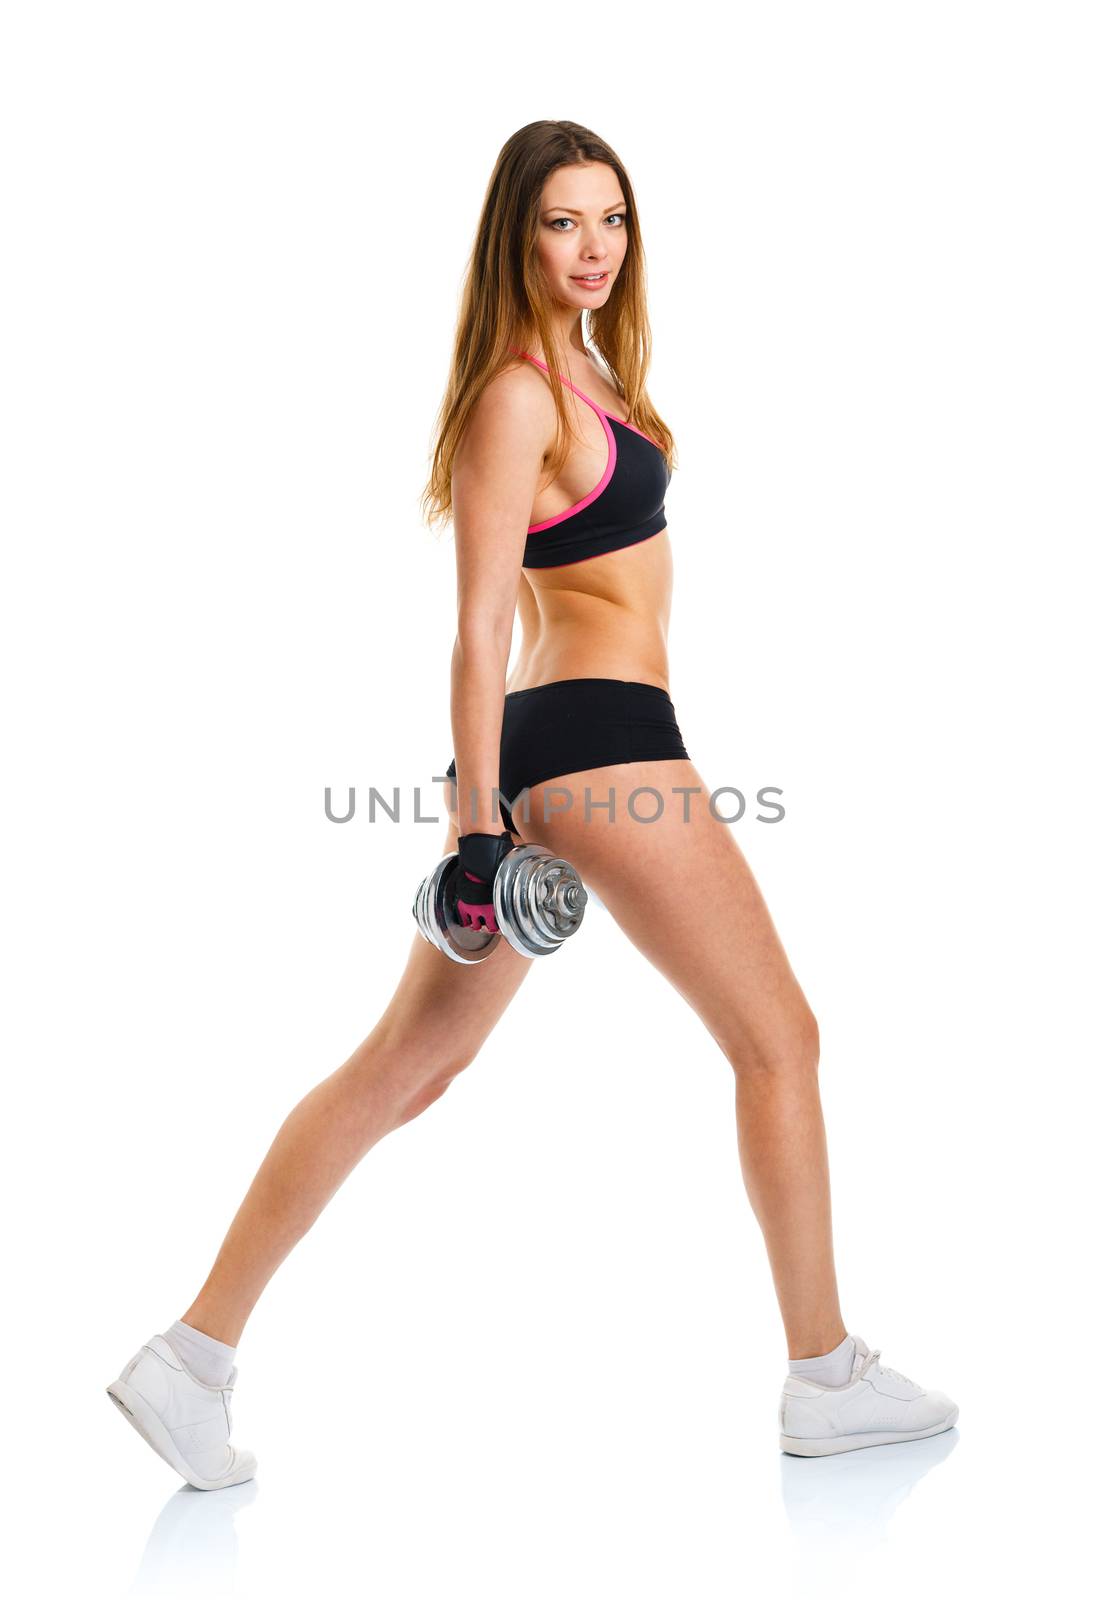 Beautiful sport woman with dumbbells doing sport exercise, isola by vlad_star